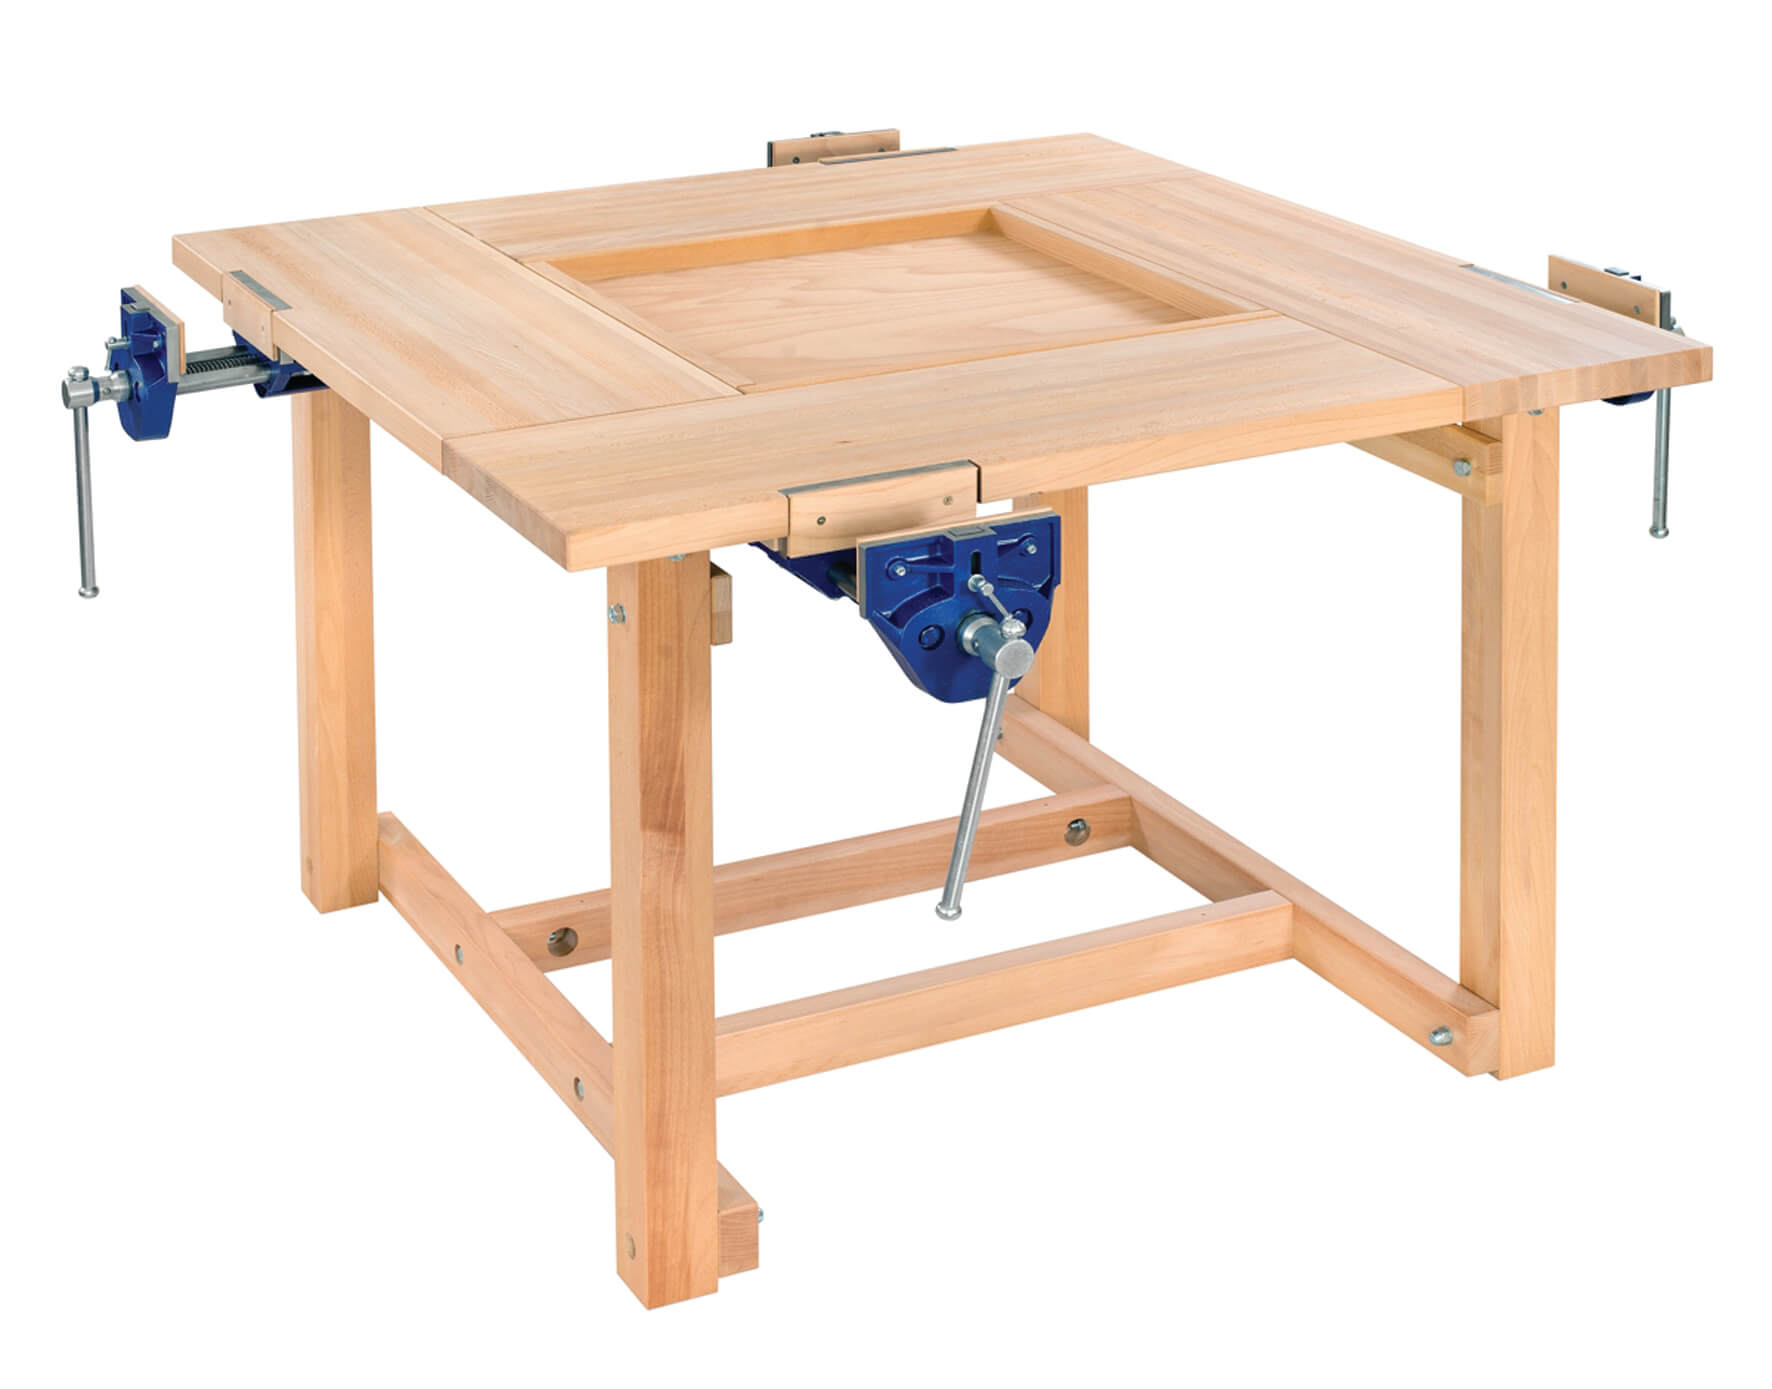 Edubench Traditional 4 Station Bench with 4x 7